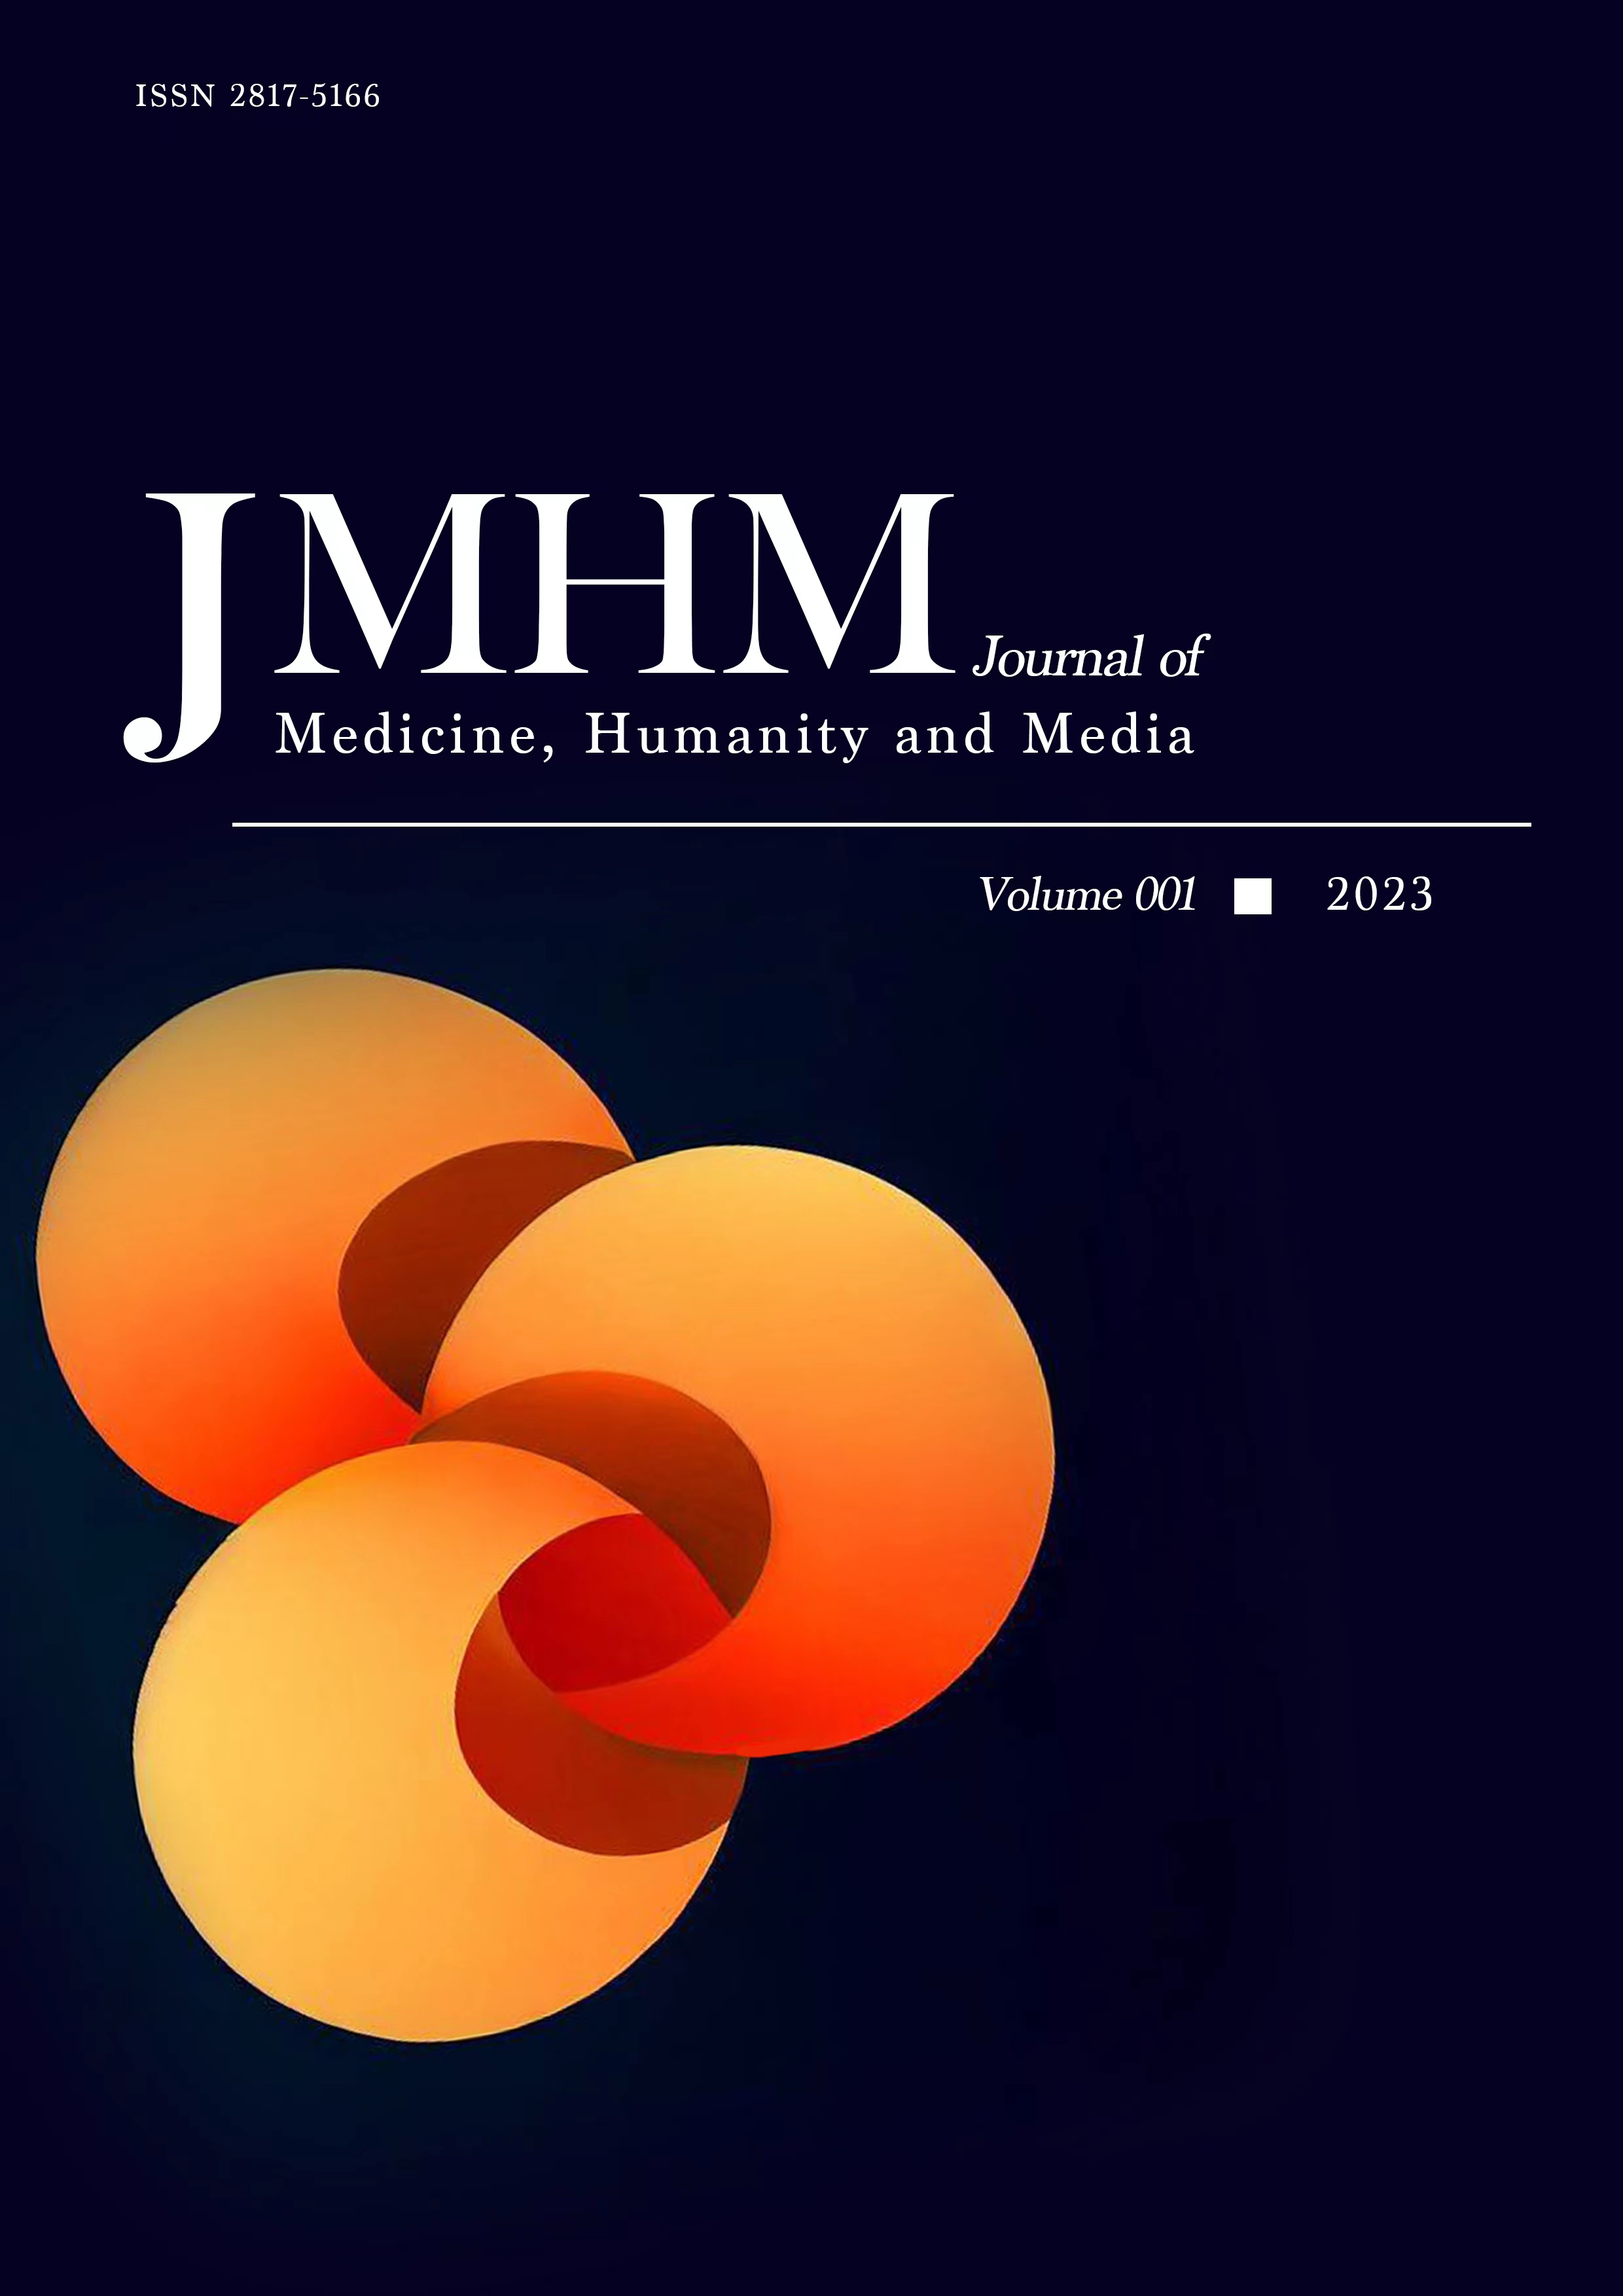 The cover of the Journal